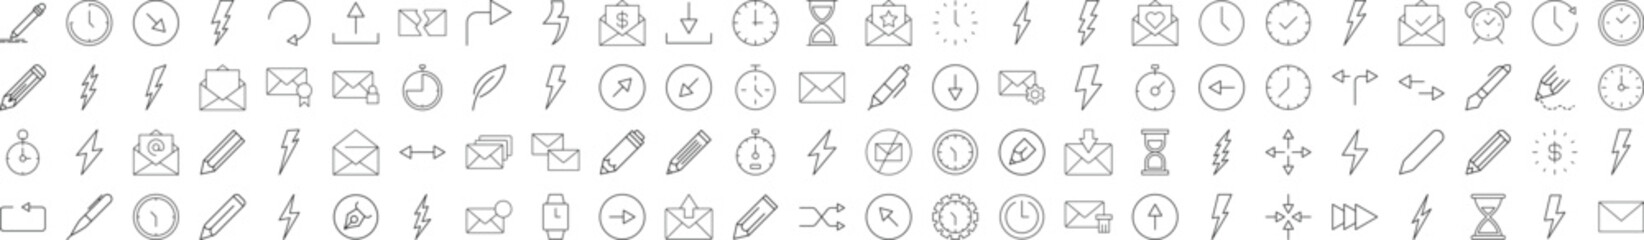 Collection of Line Icons of clocks, lighting, arrows, envelops, pens for Adverts. Suitable for books, stores, shops. Editable stroke in minimalistic outline style. Symbol for design